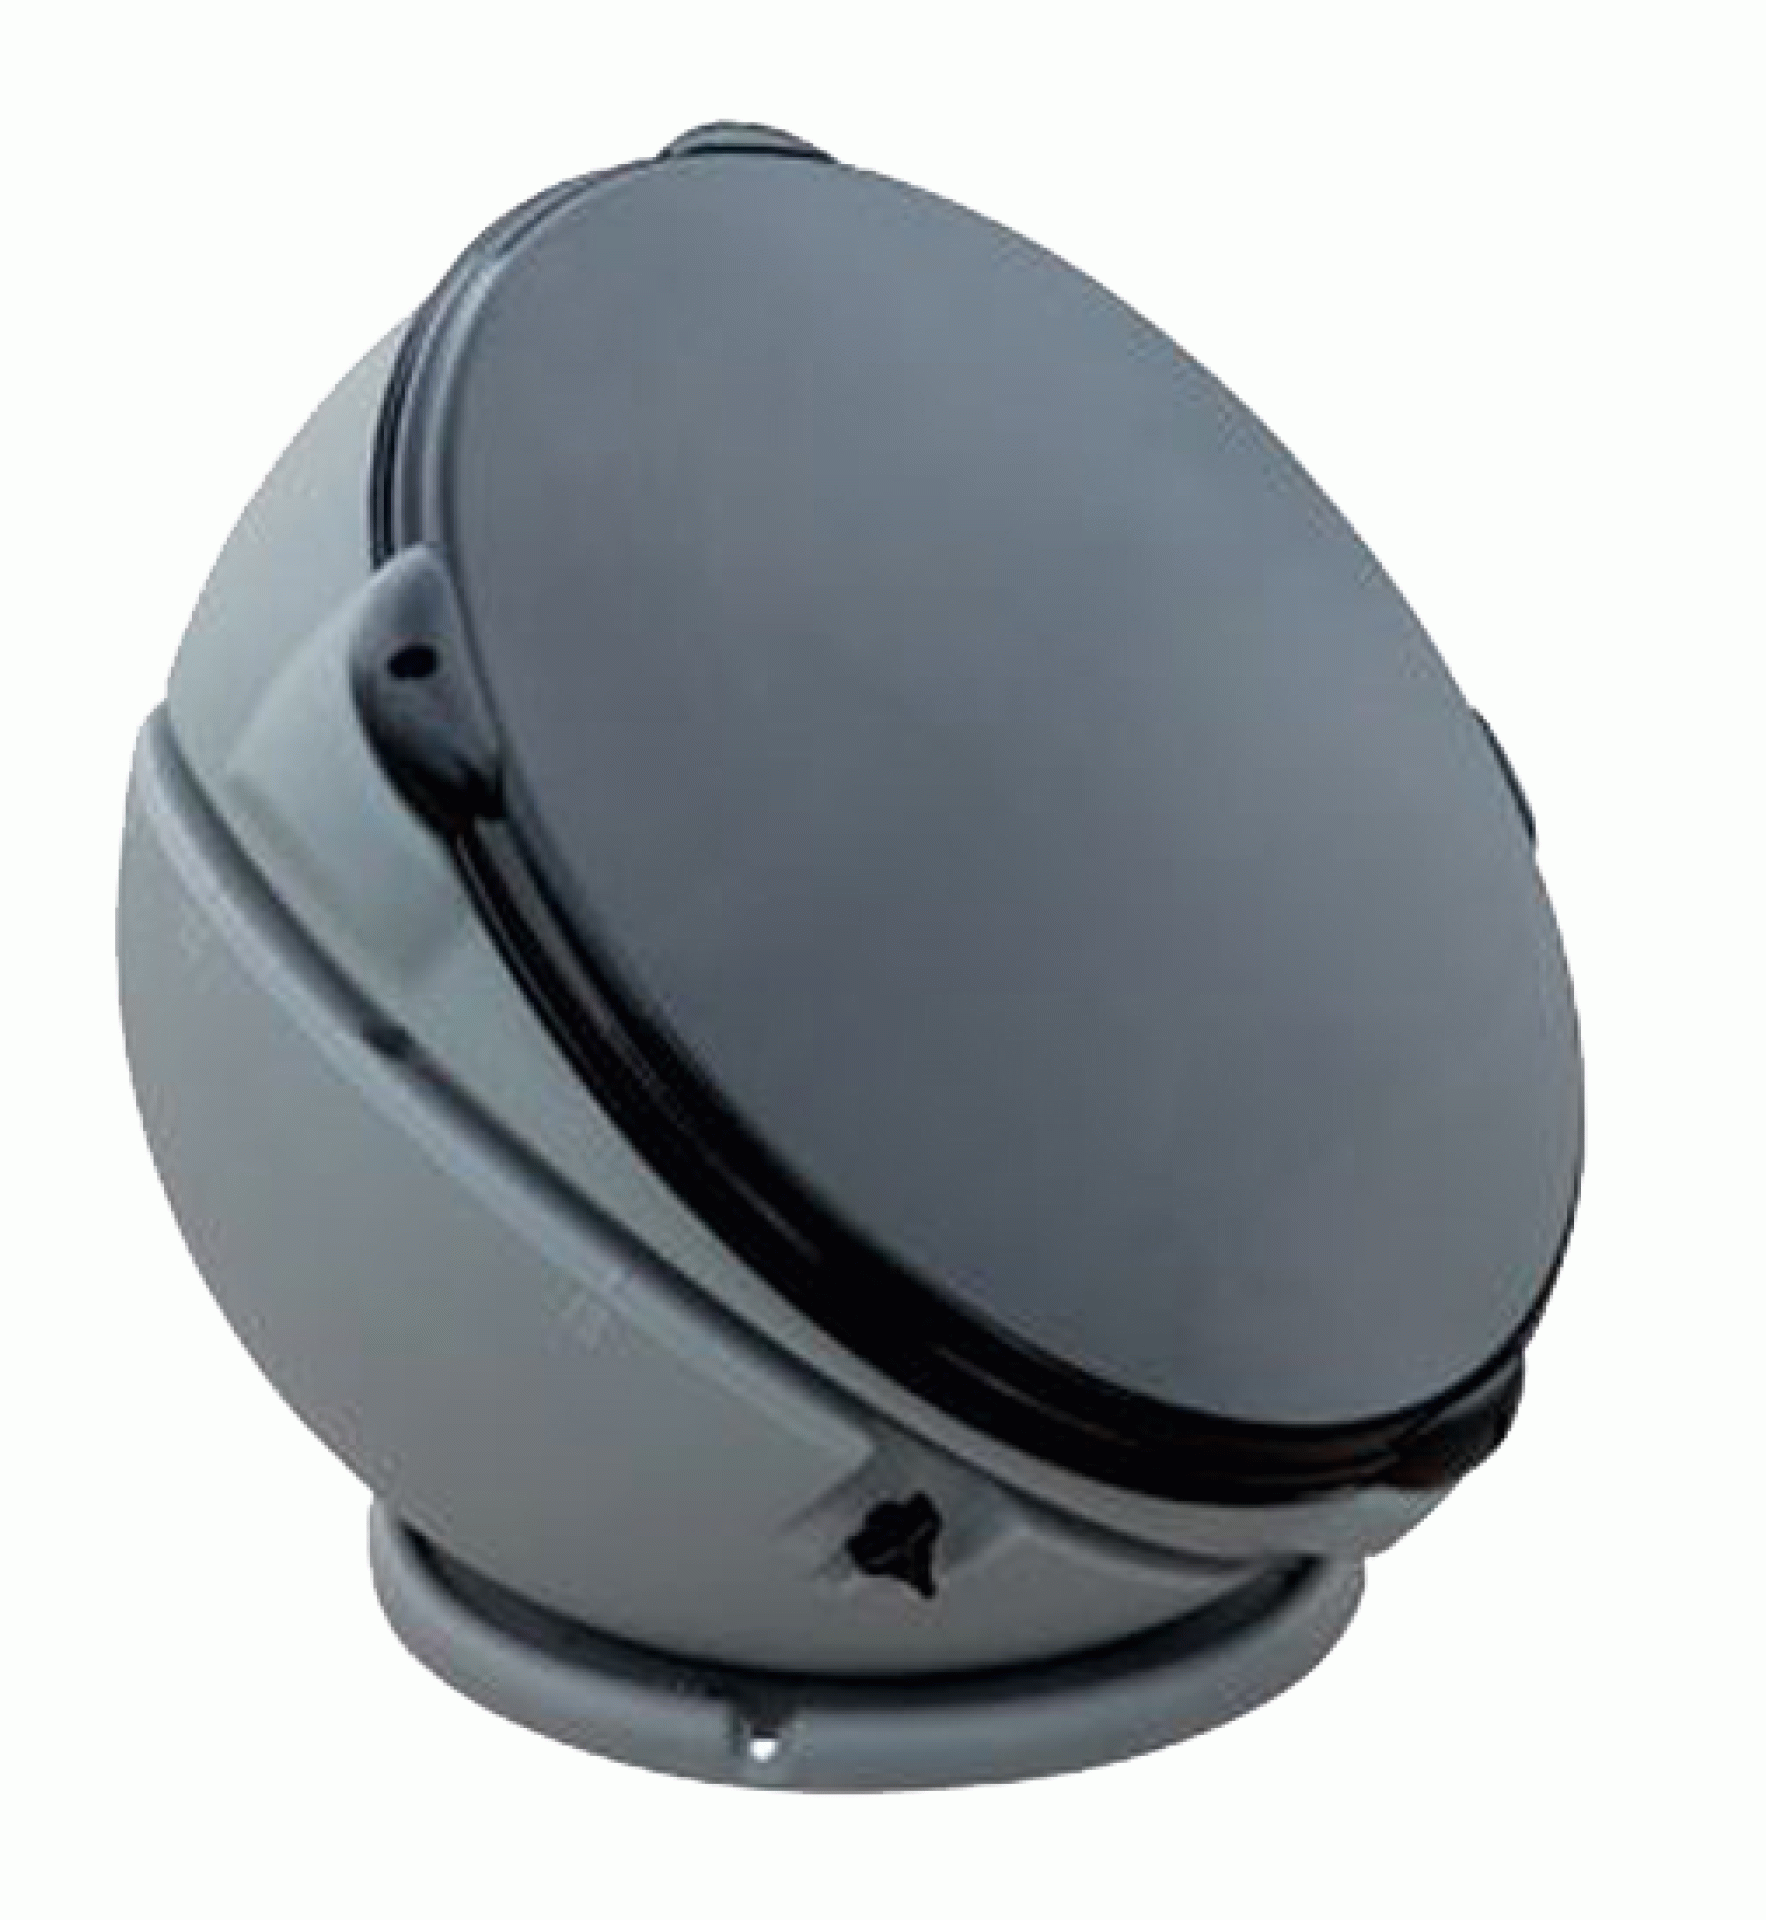 WINEGARD COMPANY | GM-5000 | CARRYOUT ANSER HYBRID AUTOMATIC PORTABLE SATELLITE TV ANTENNA